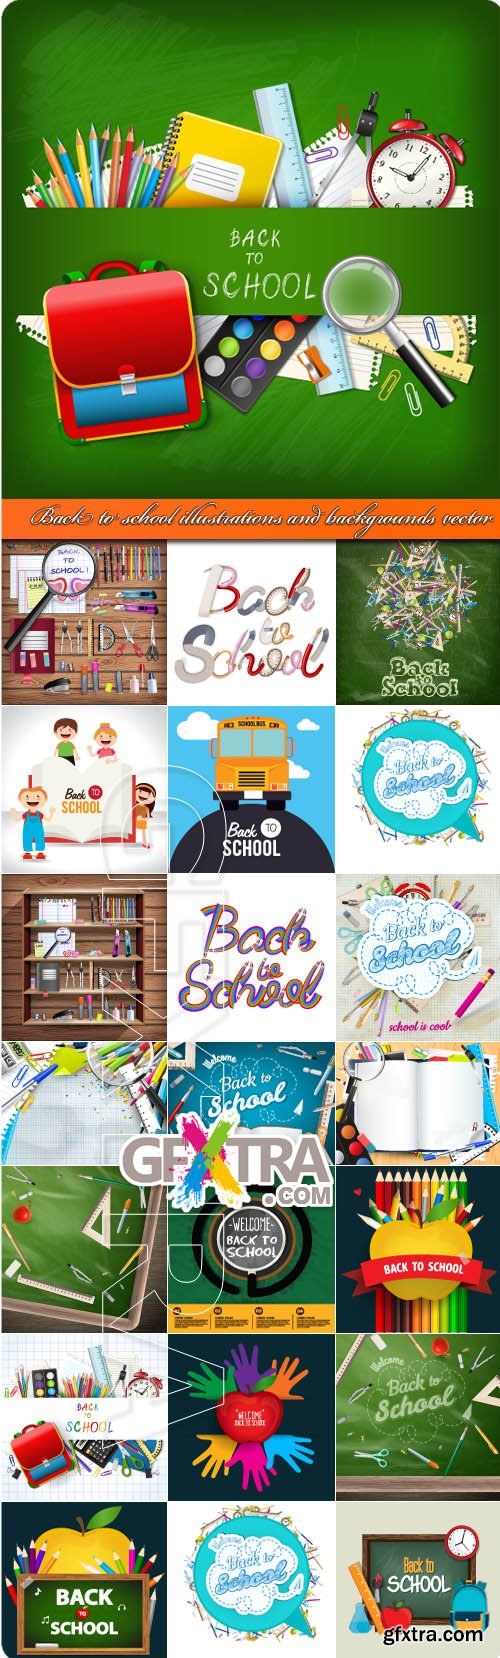 Back to school illustrations and backgrounds vector